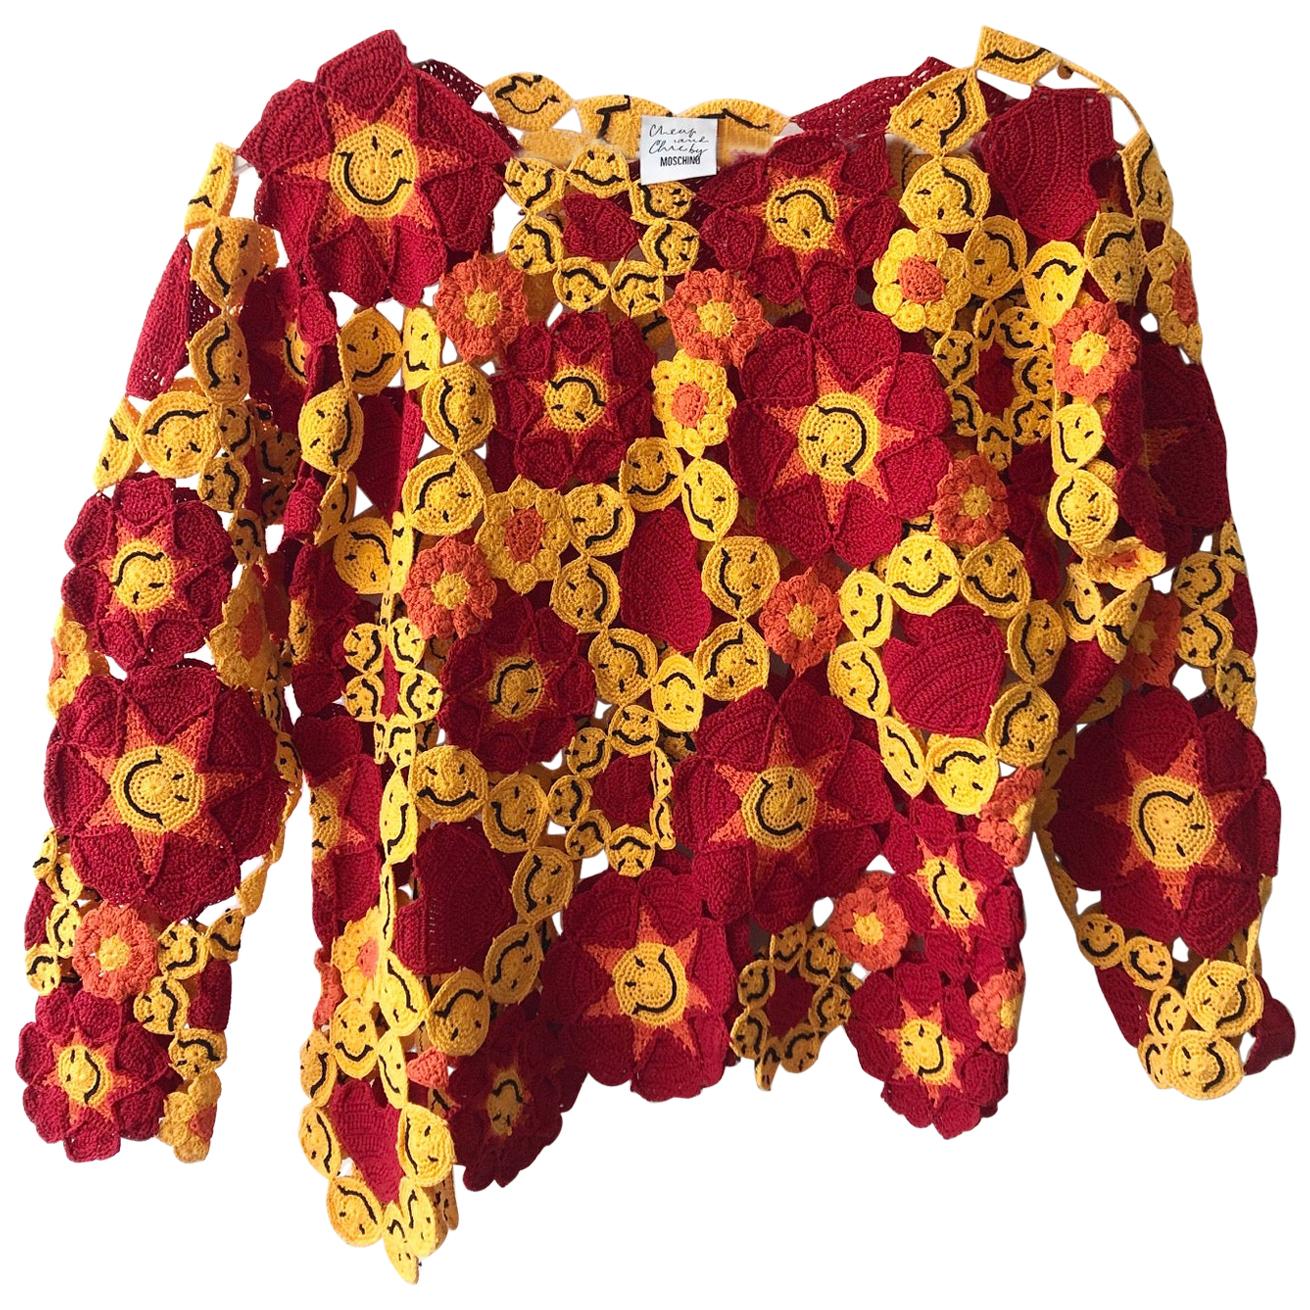  1990s Moschino Red and Yellow Crochet Smiley Acid Face Sweater